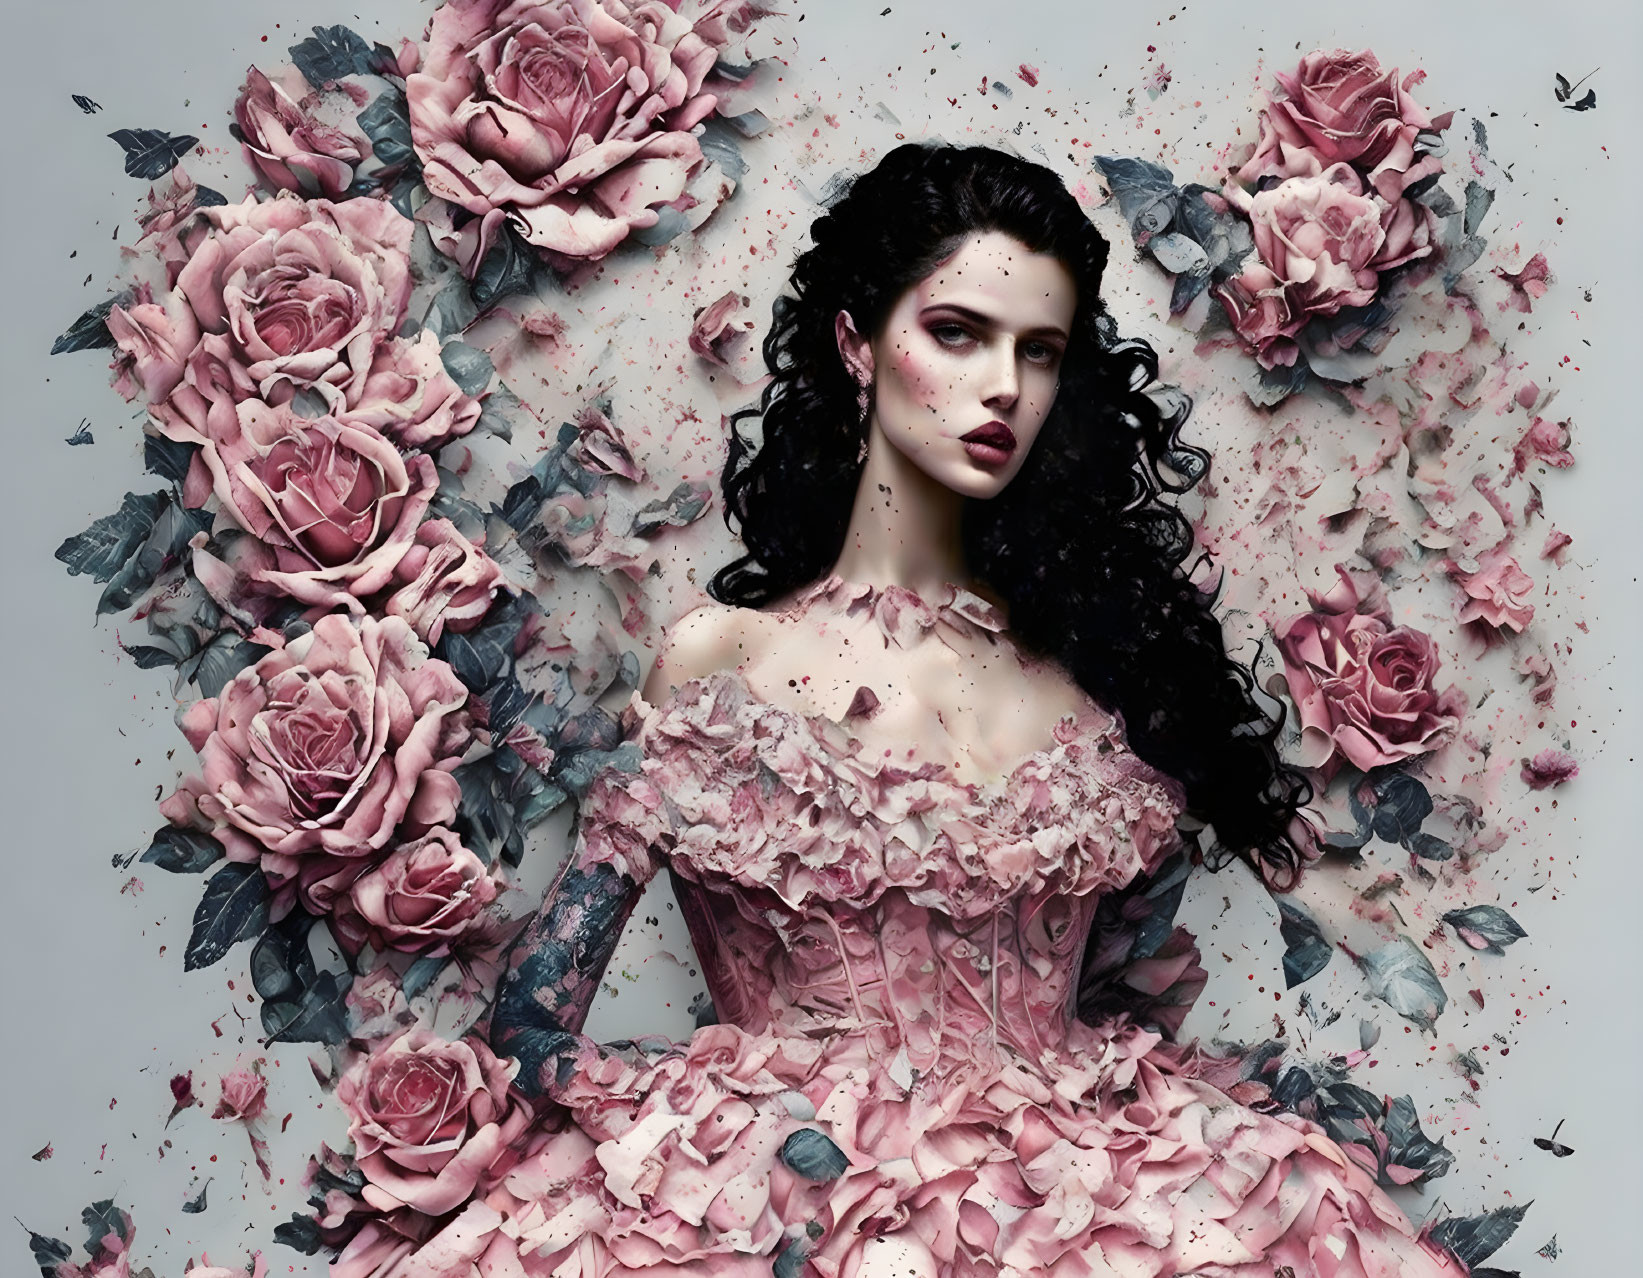 Dark-haired woman in ornate dress surrounded by pink roses and petals